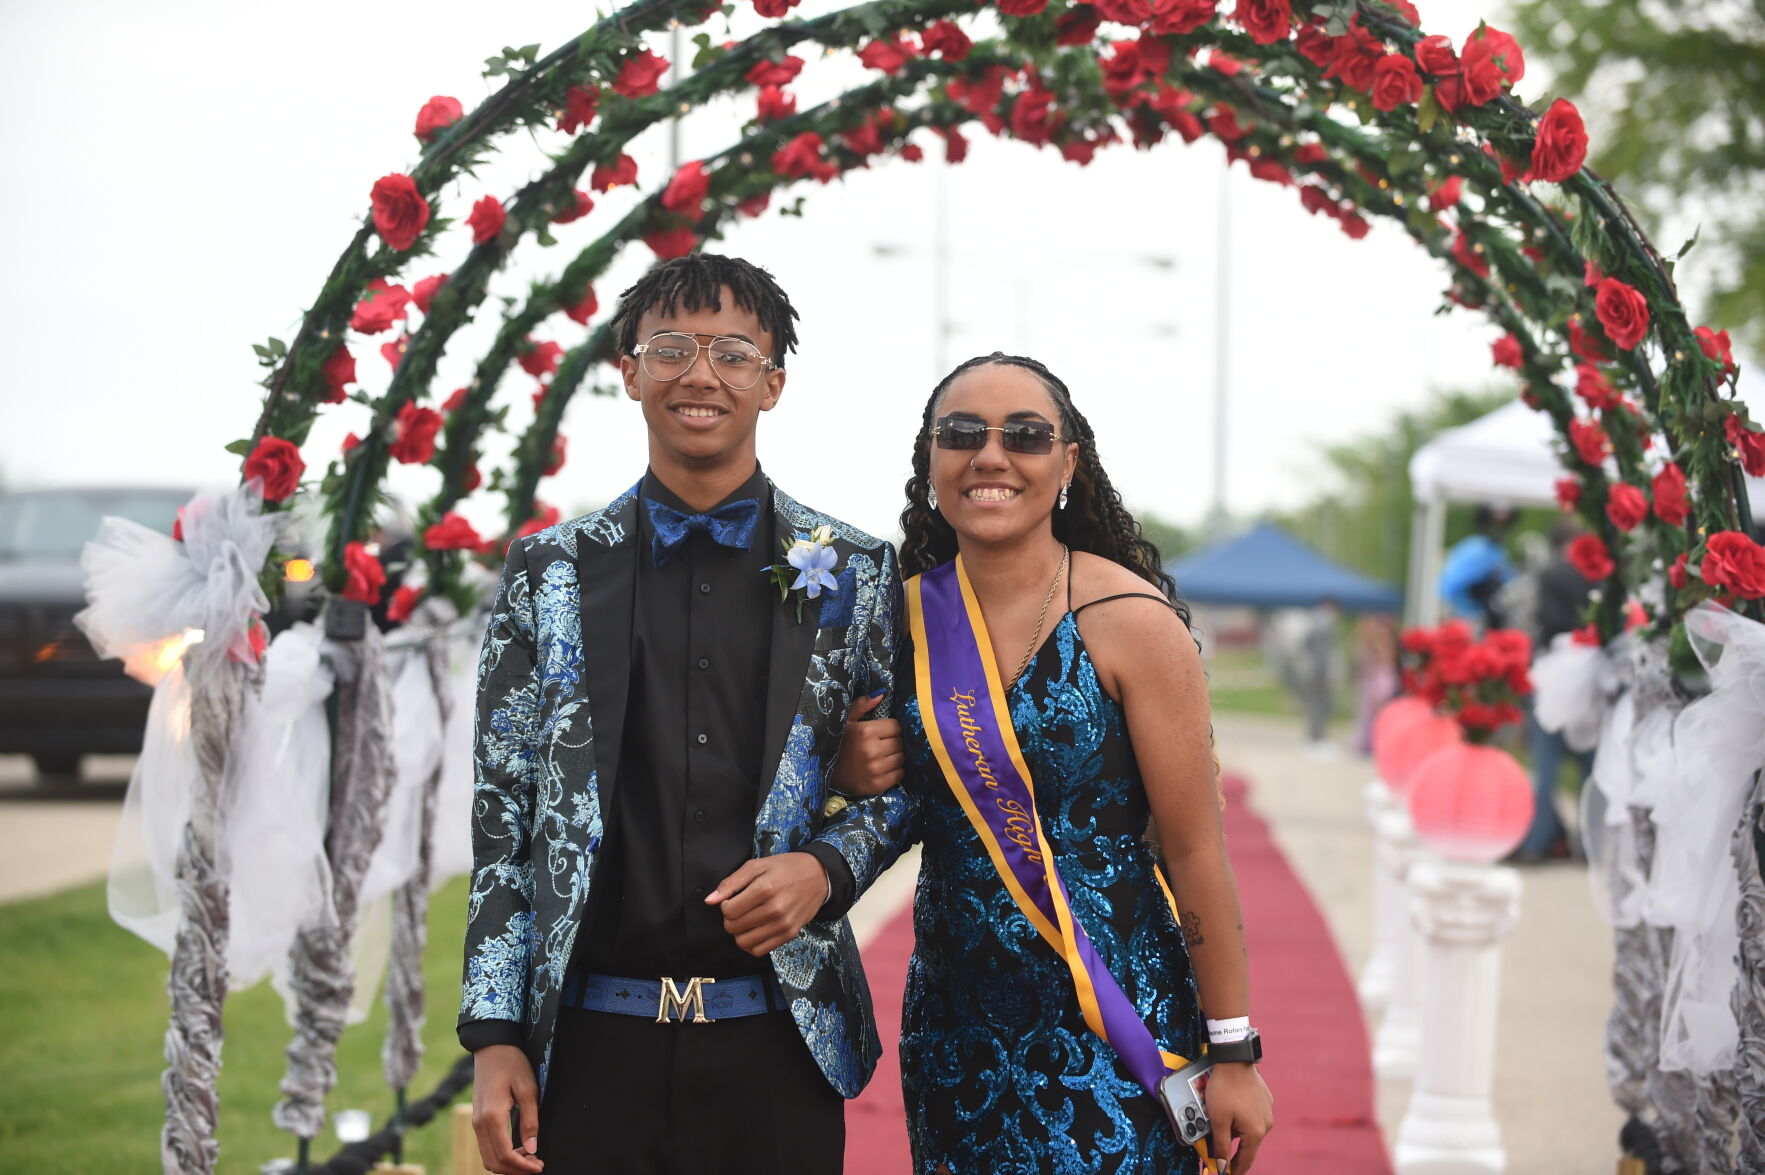 IN PHOTOS Racine County Post Prom 2022 Second set of arrivals